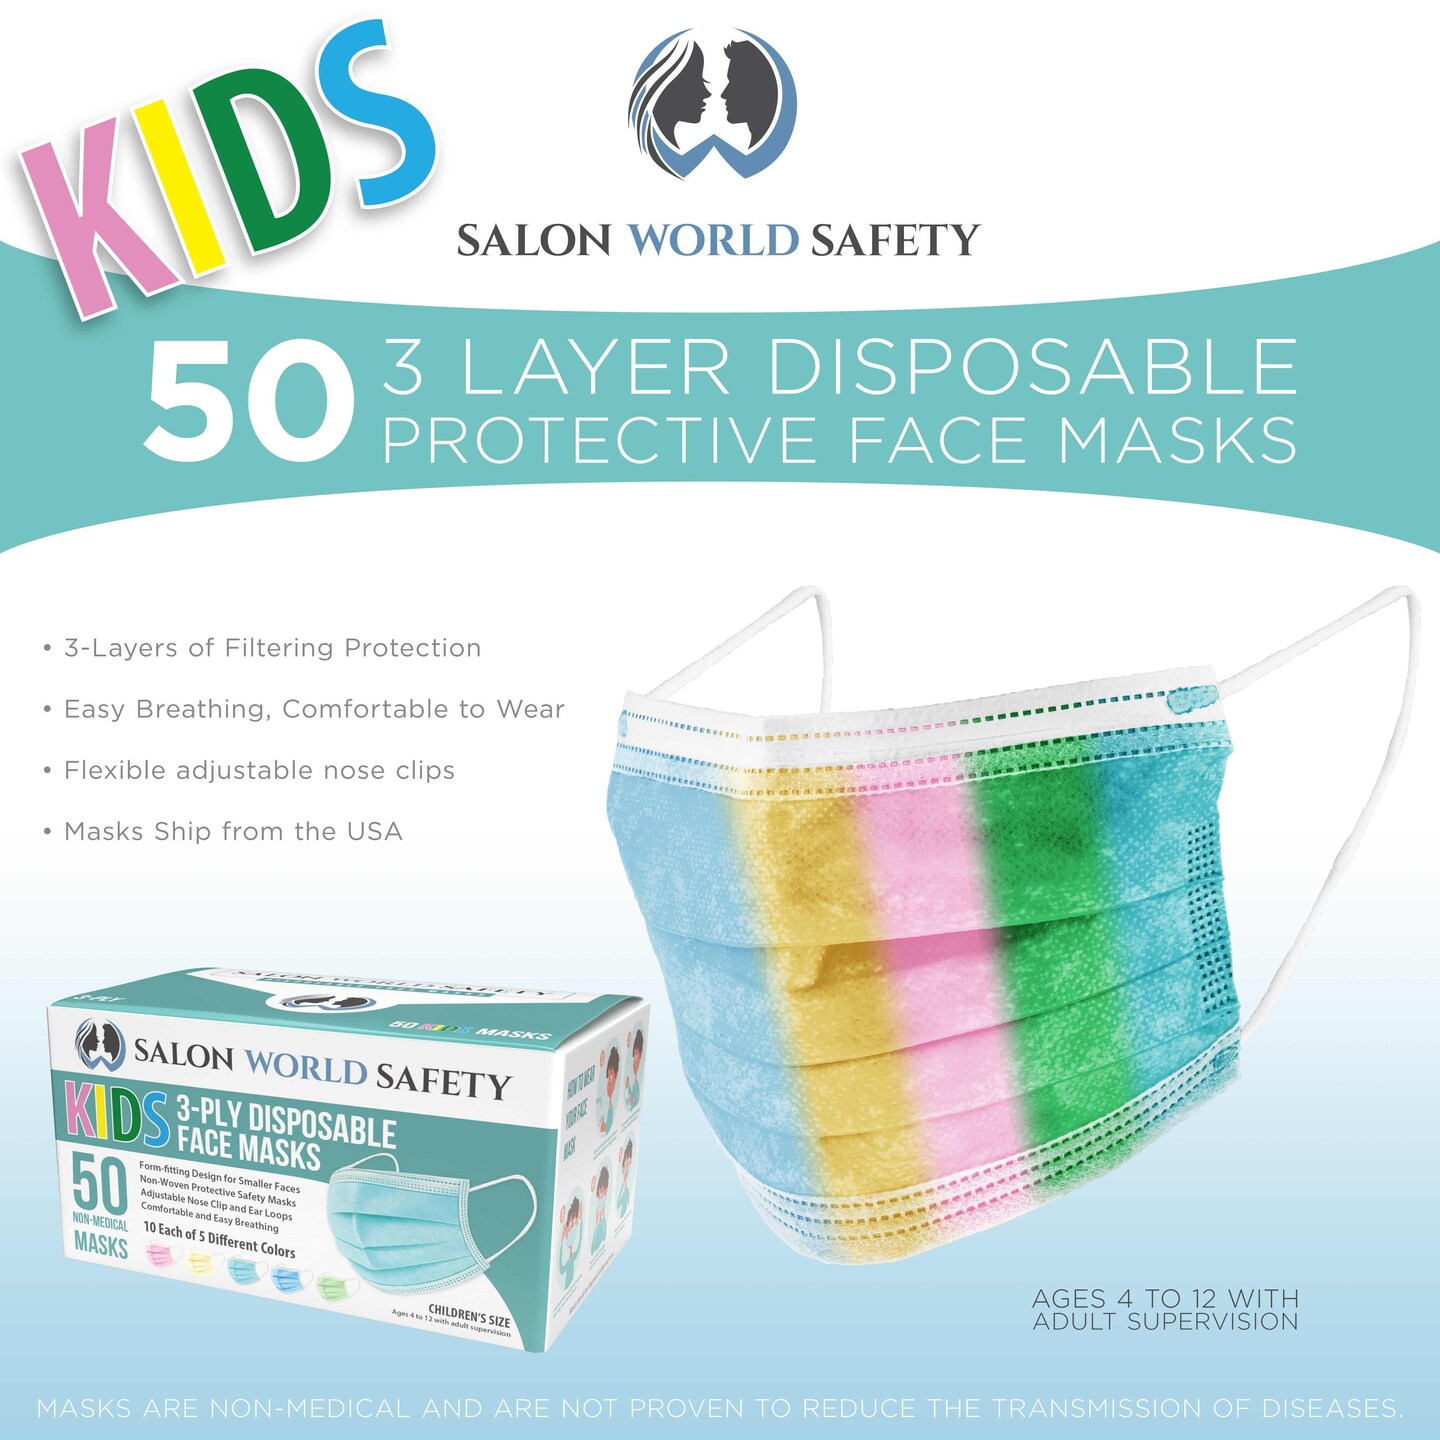 Salon World Safety Kids Masks (Sealed Dispenser Box of 50) - 5 Colors, 10 Each - 3 Layer Disposable Protective Children&#x27;s Face Masks 3-Ply Fabric